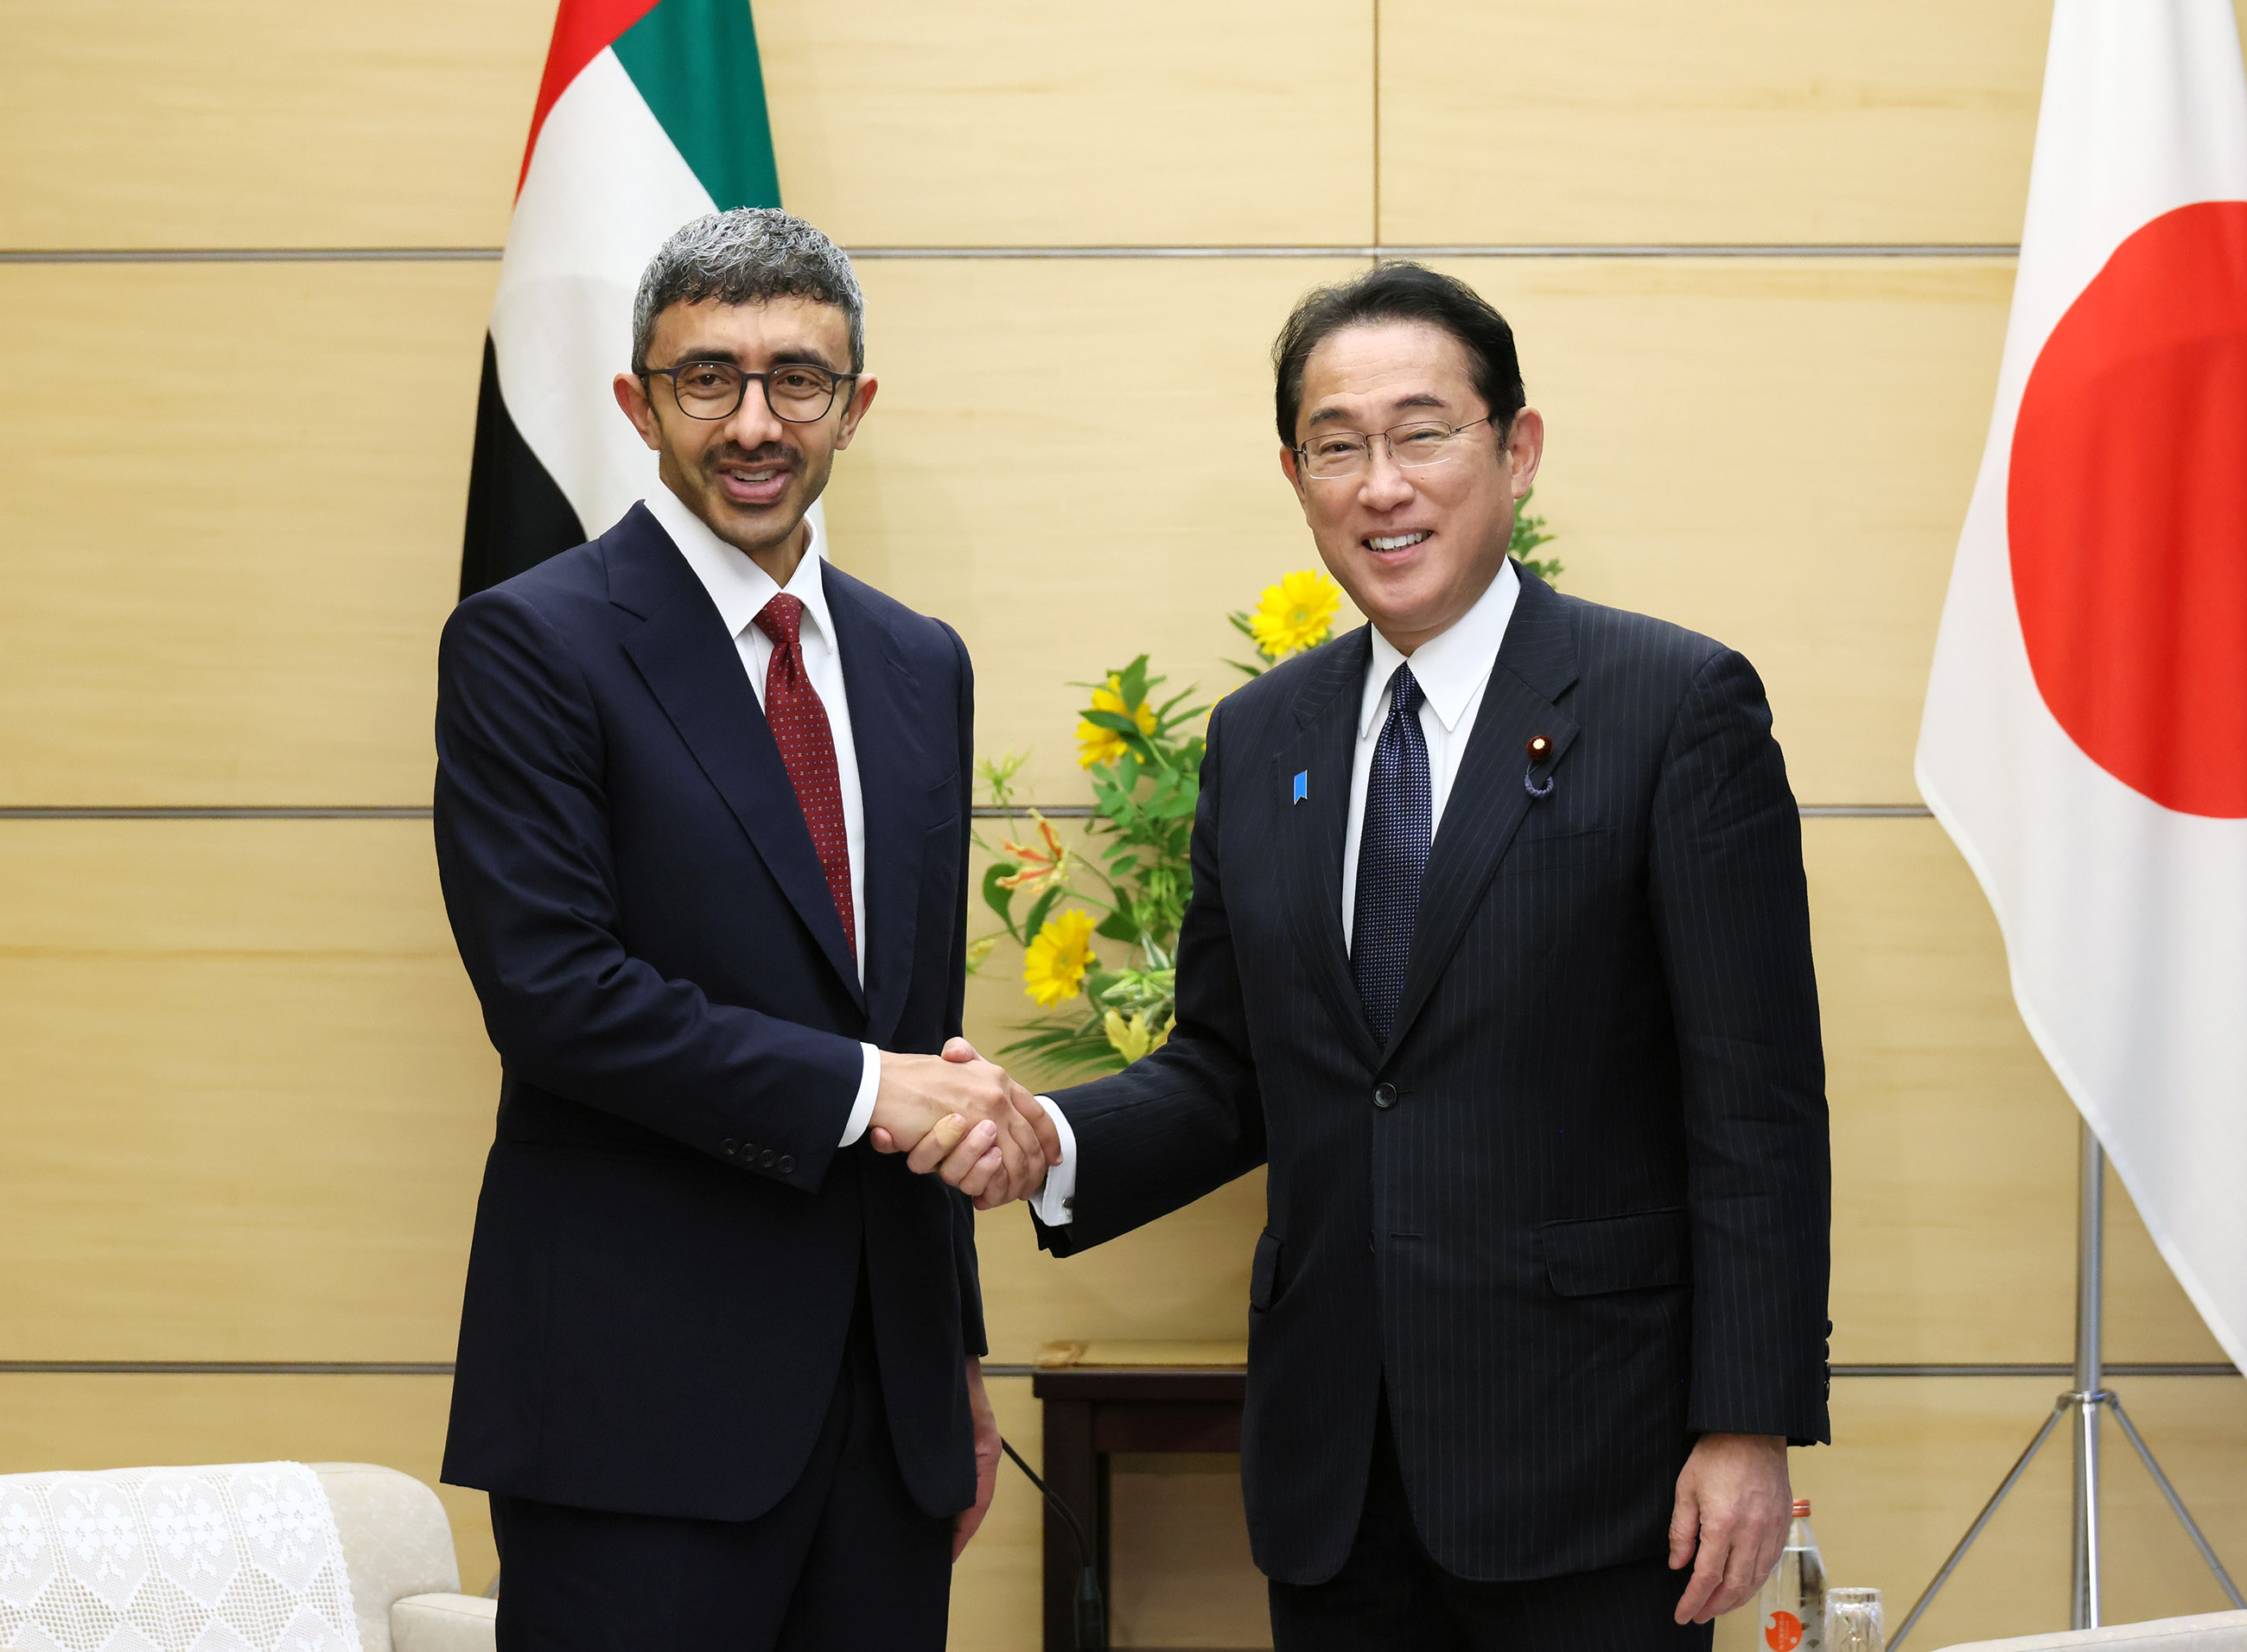 Courtesy Call from Foreign Minister Sheikh Abdullah bin Zayed Al Nahyan of the United Arab Emirates